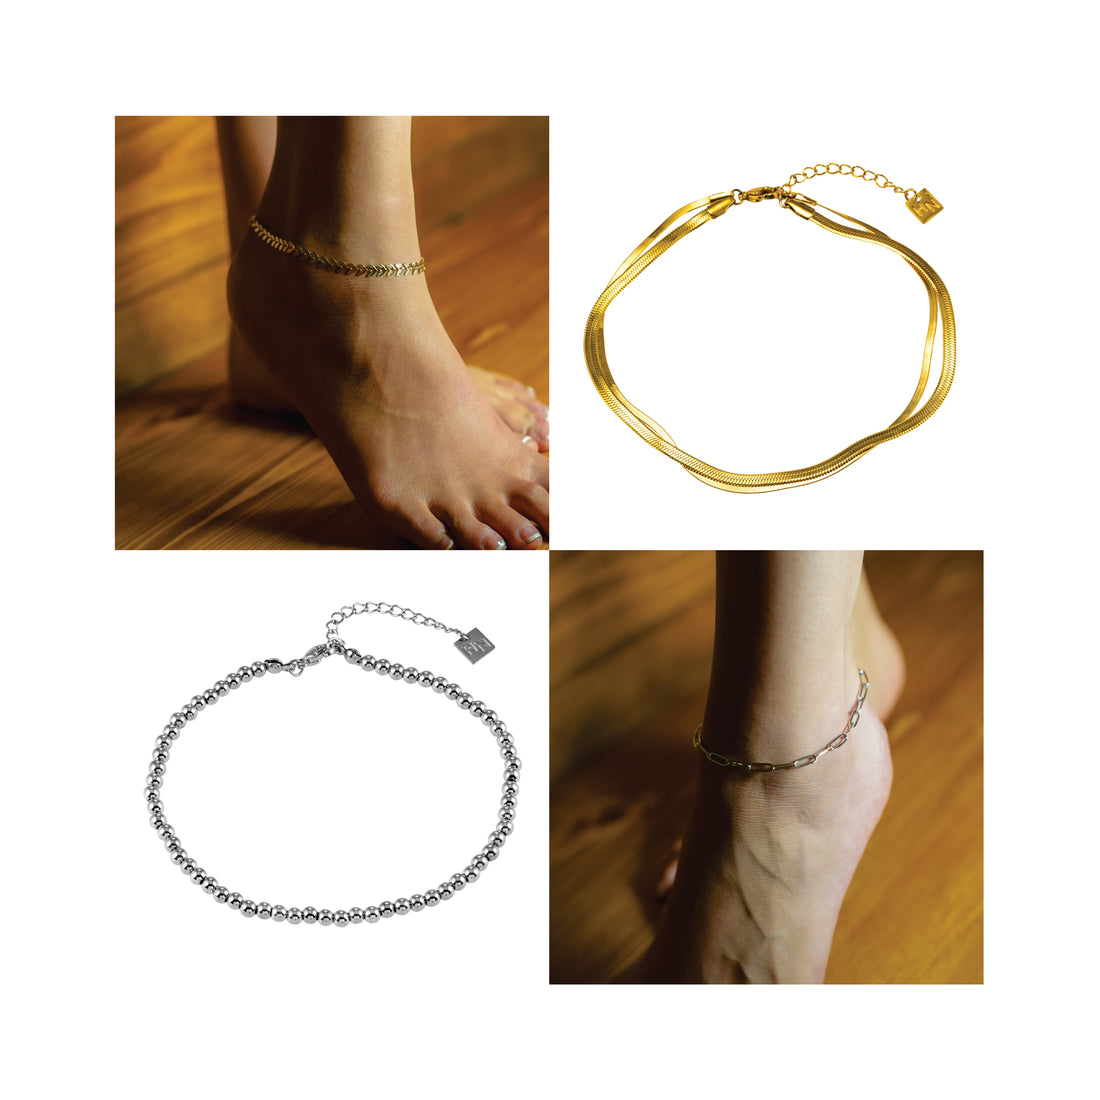 A Style Guide to Anklets